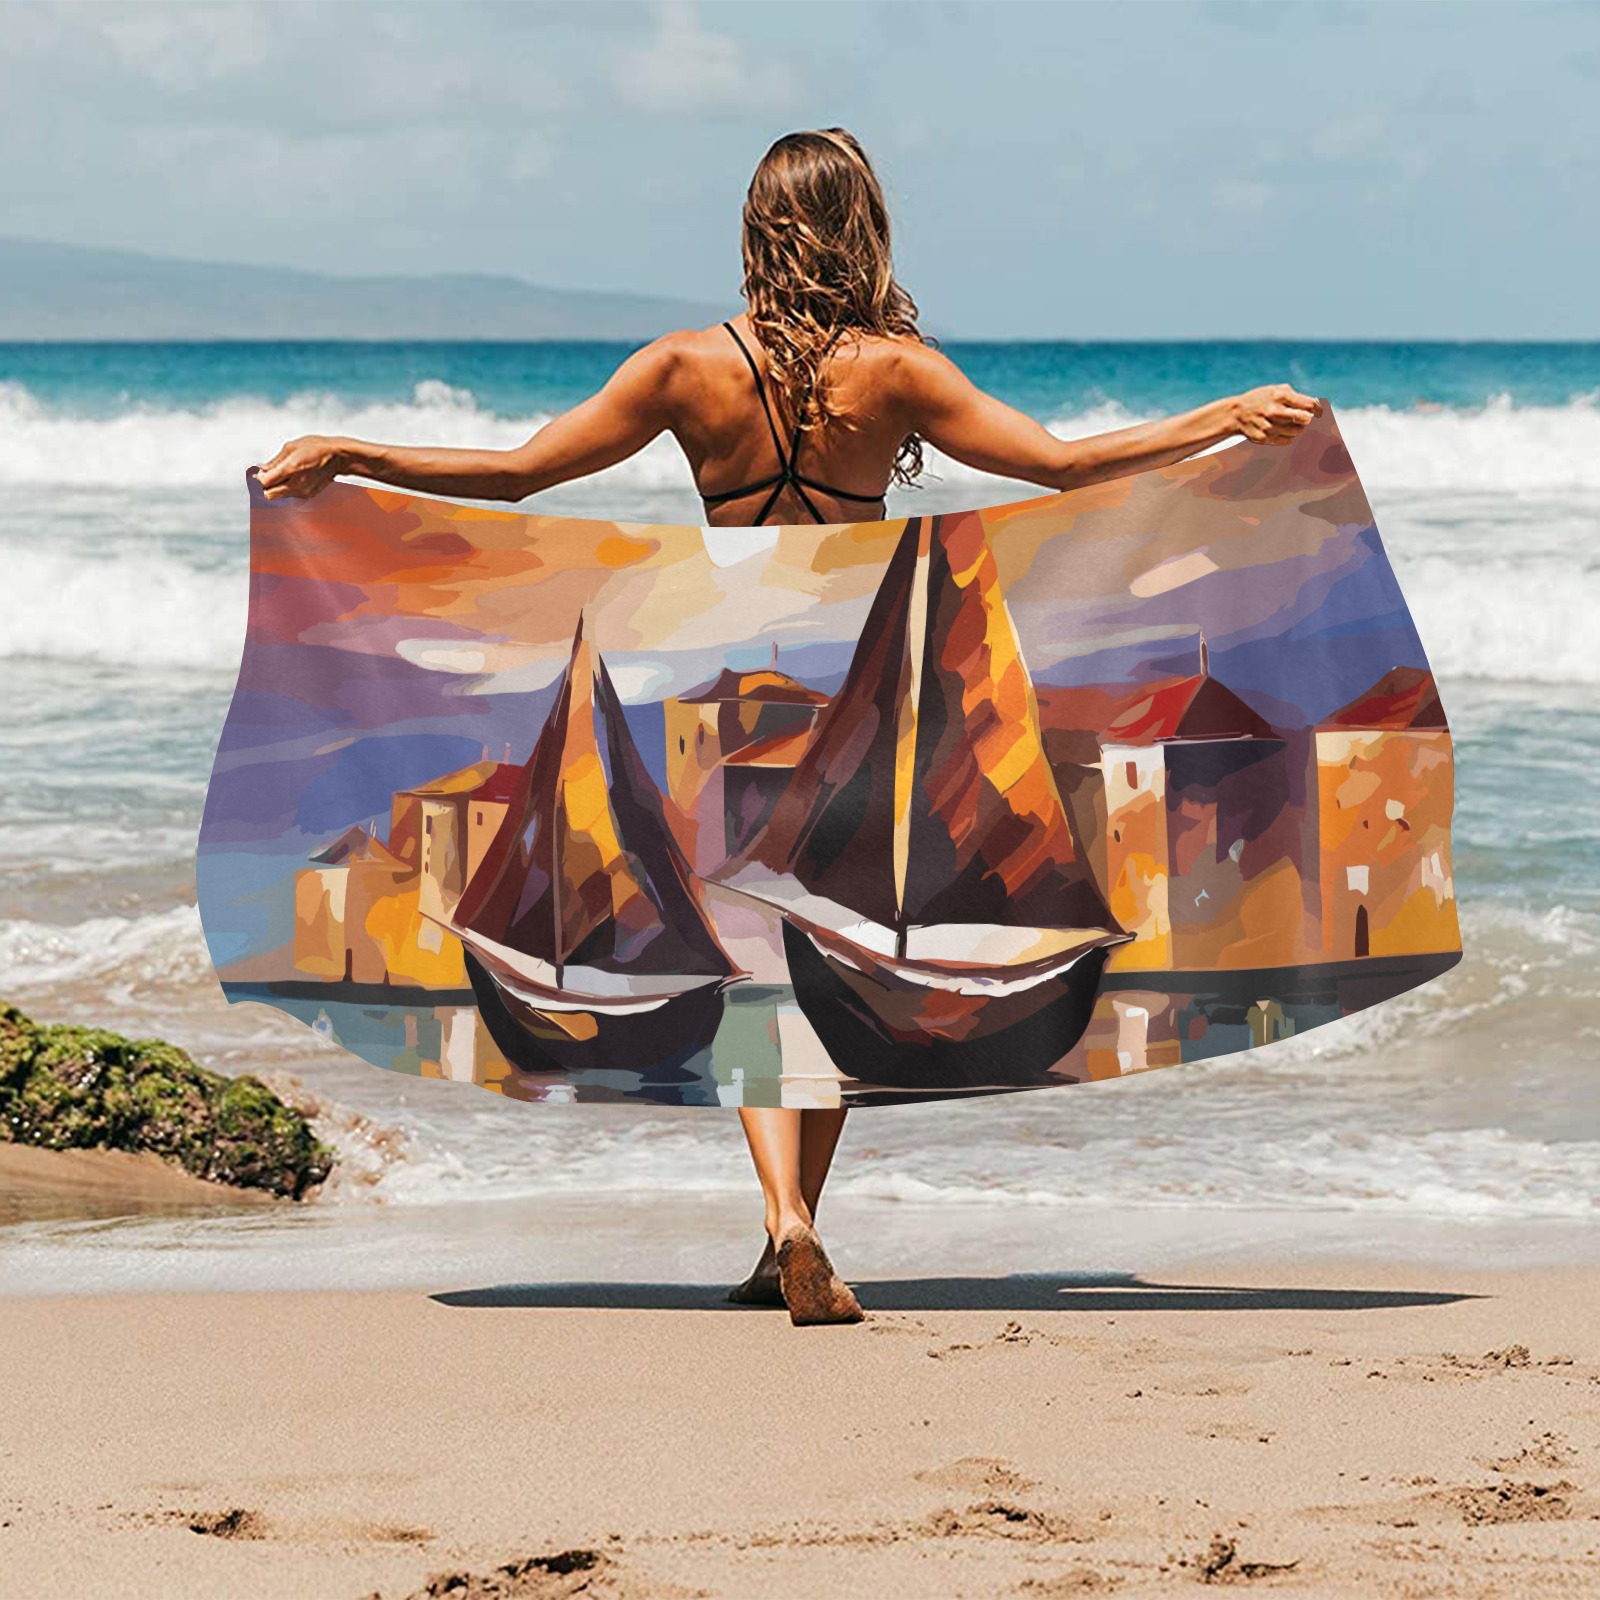 Two sailboats and a fantasy sity in the evening. Beach Towel 32"x 71"